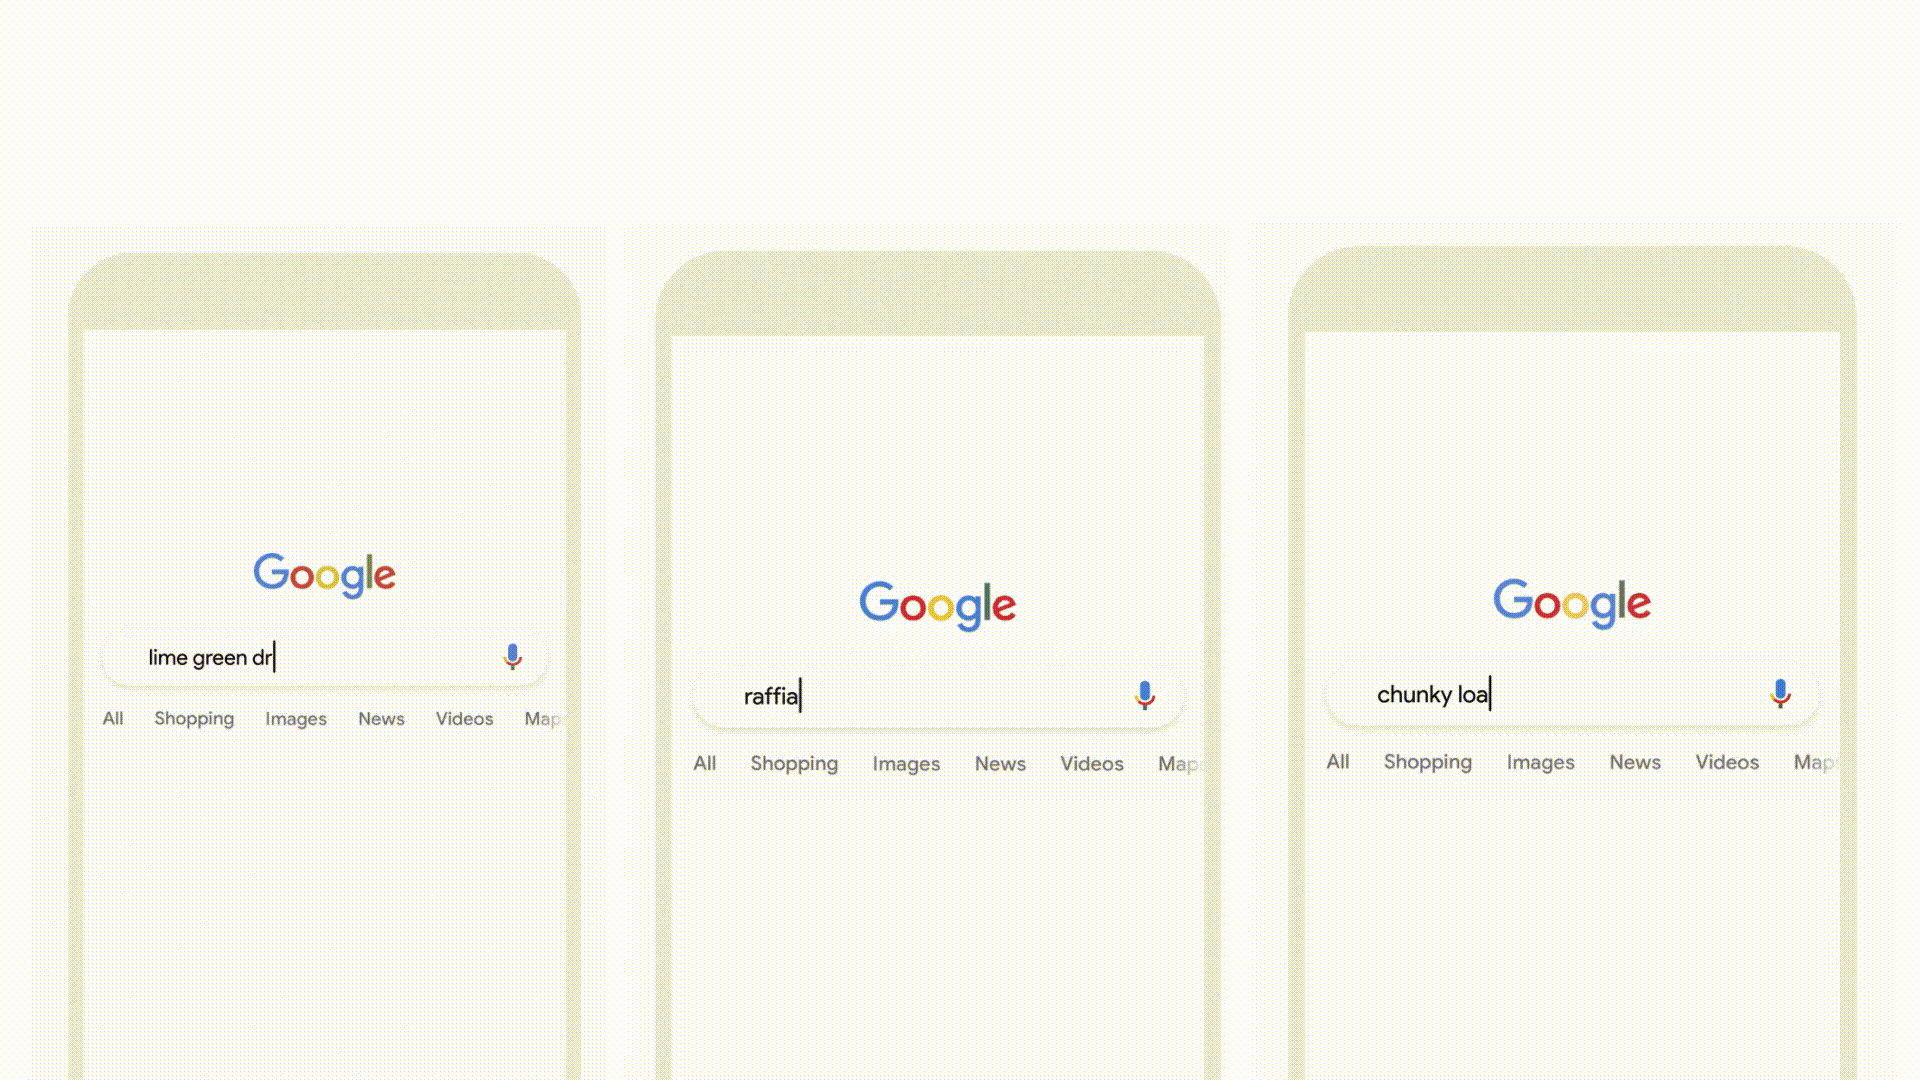 Phone screens show animations of a Google search for various clothing items with visual scrolling results